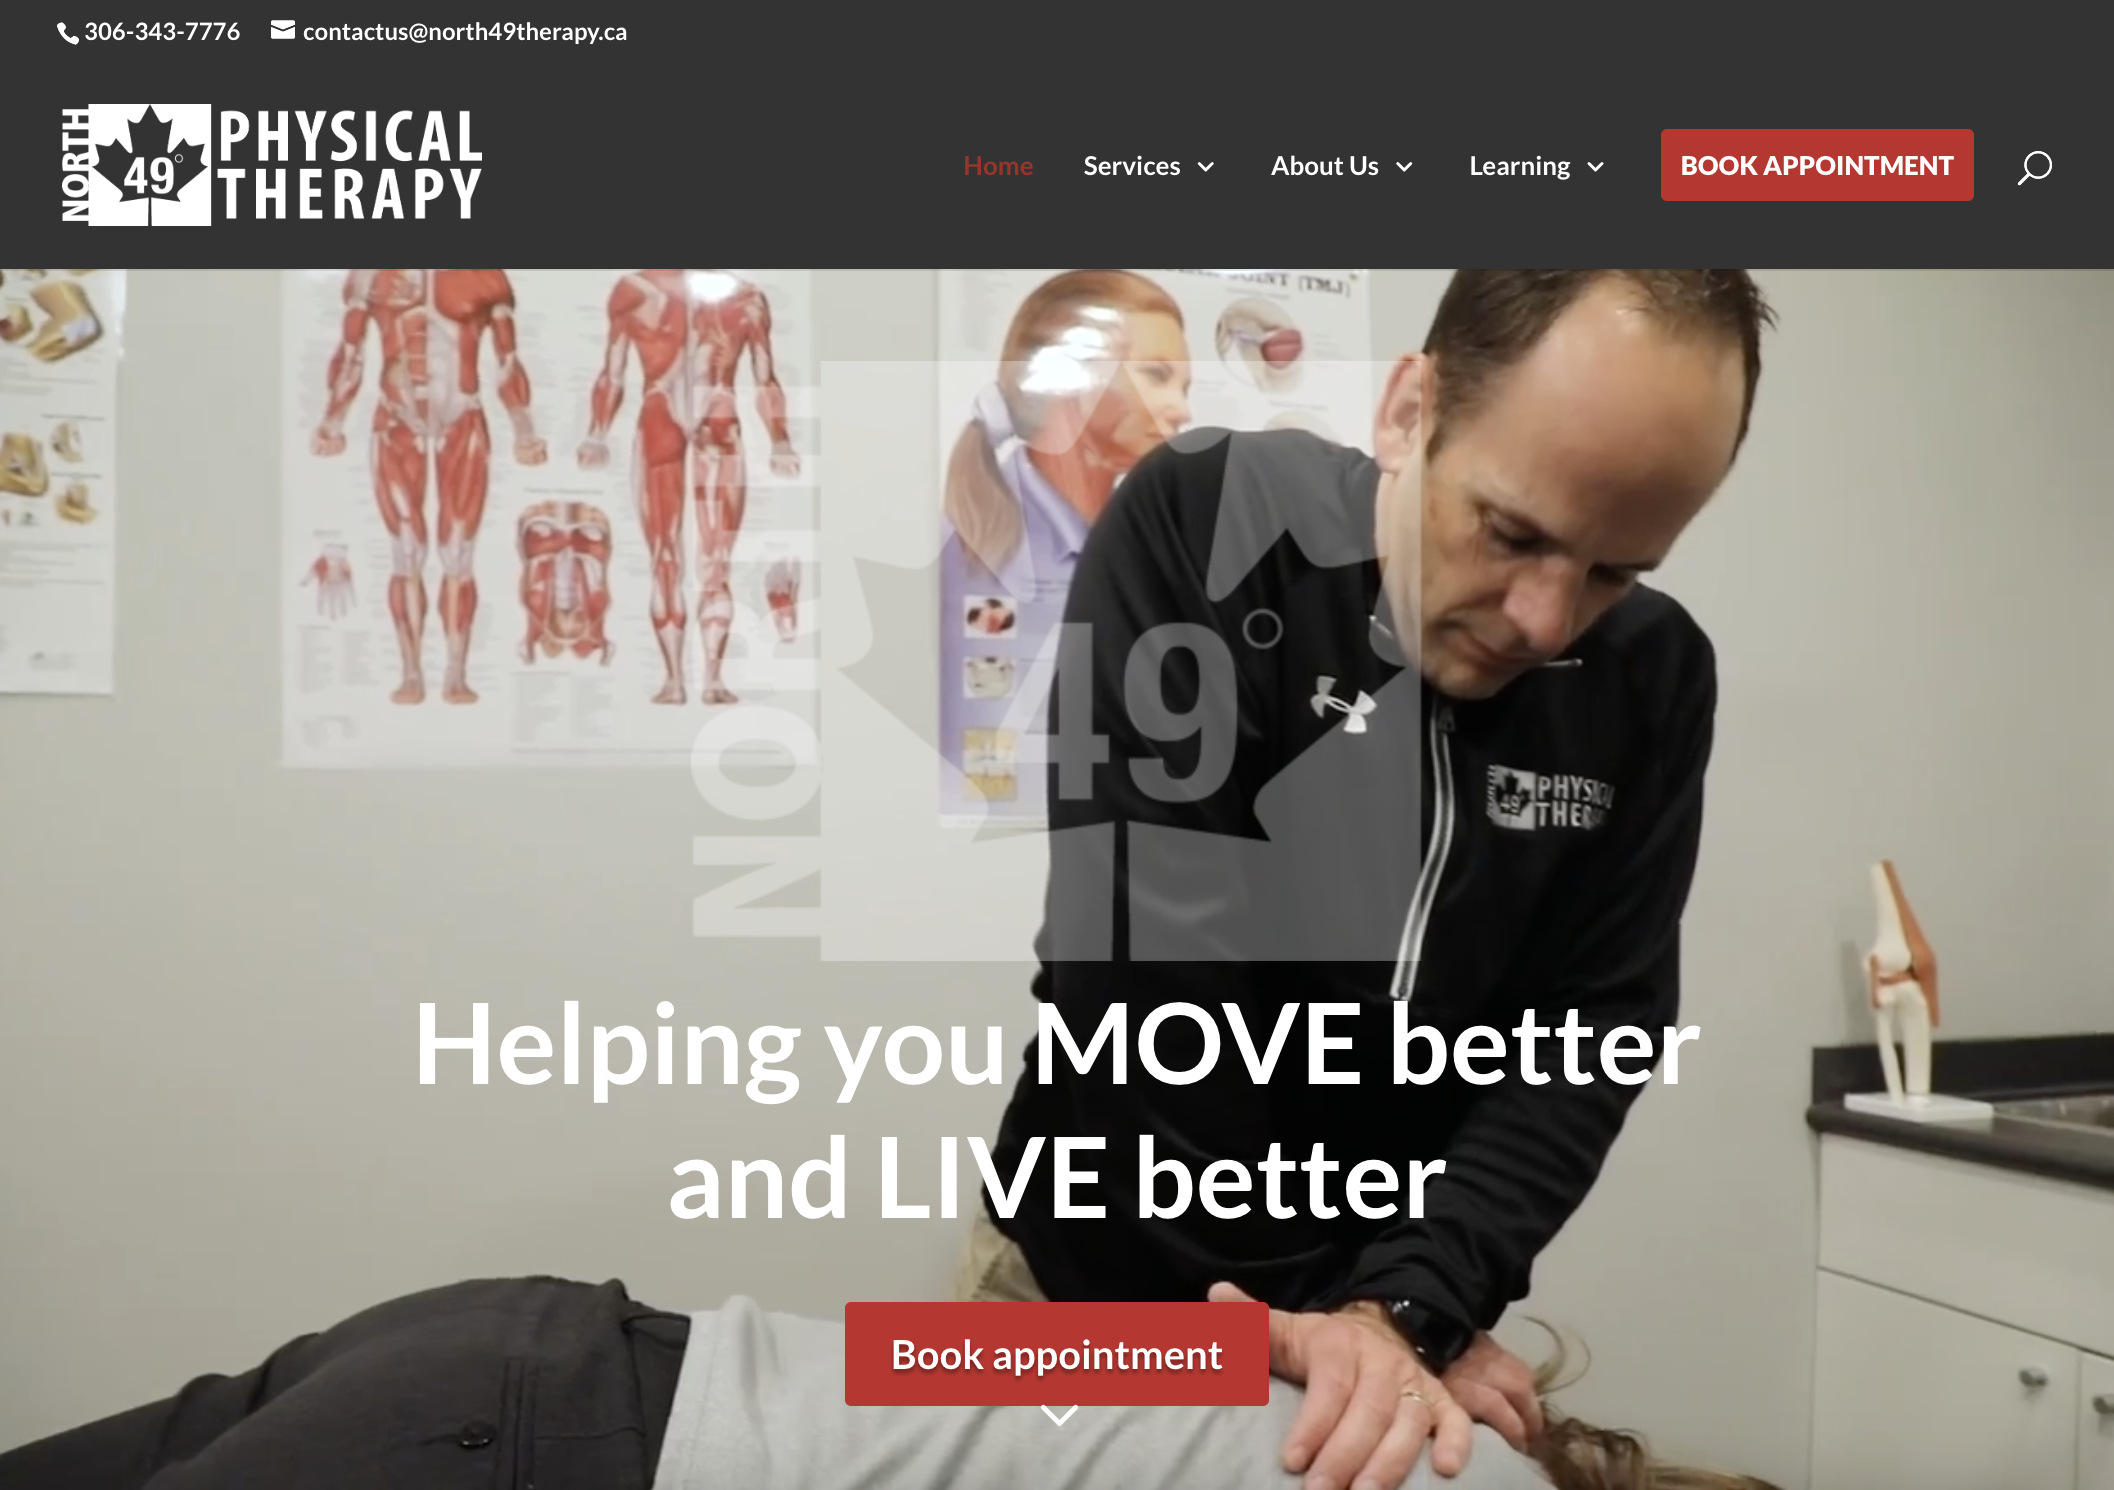 North 49 Physical Therapy Website